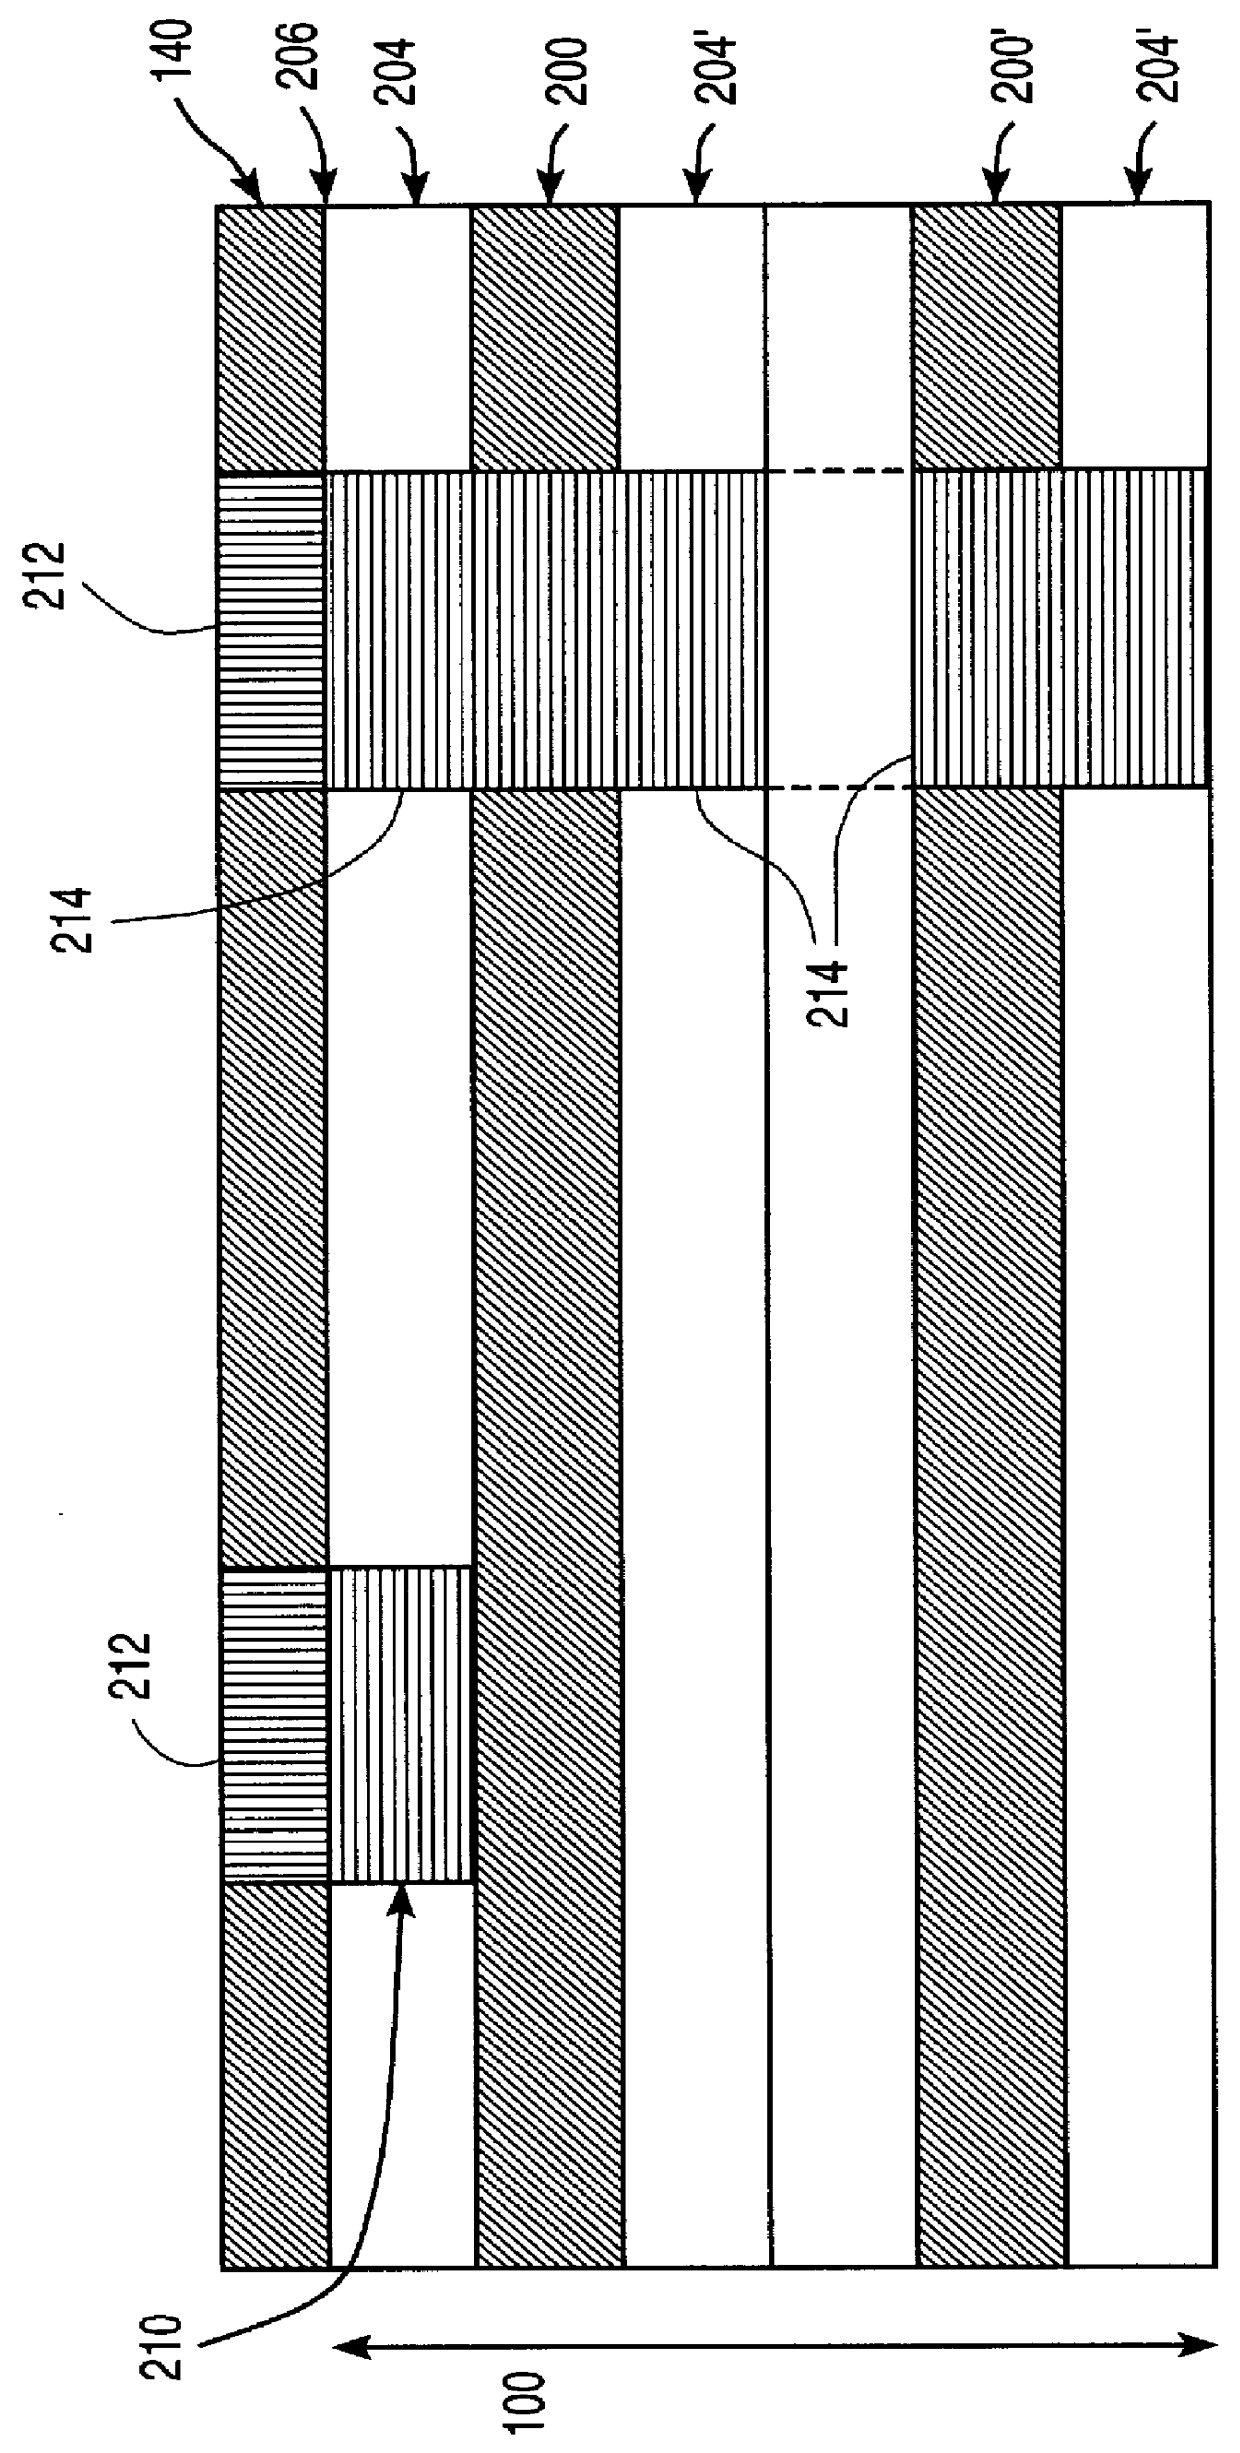 Via pad geometry supporting uniform transmission line structures